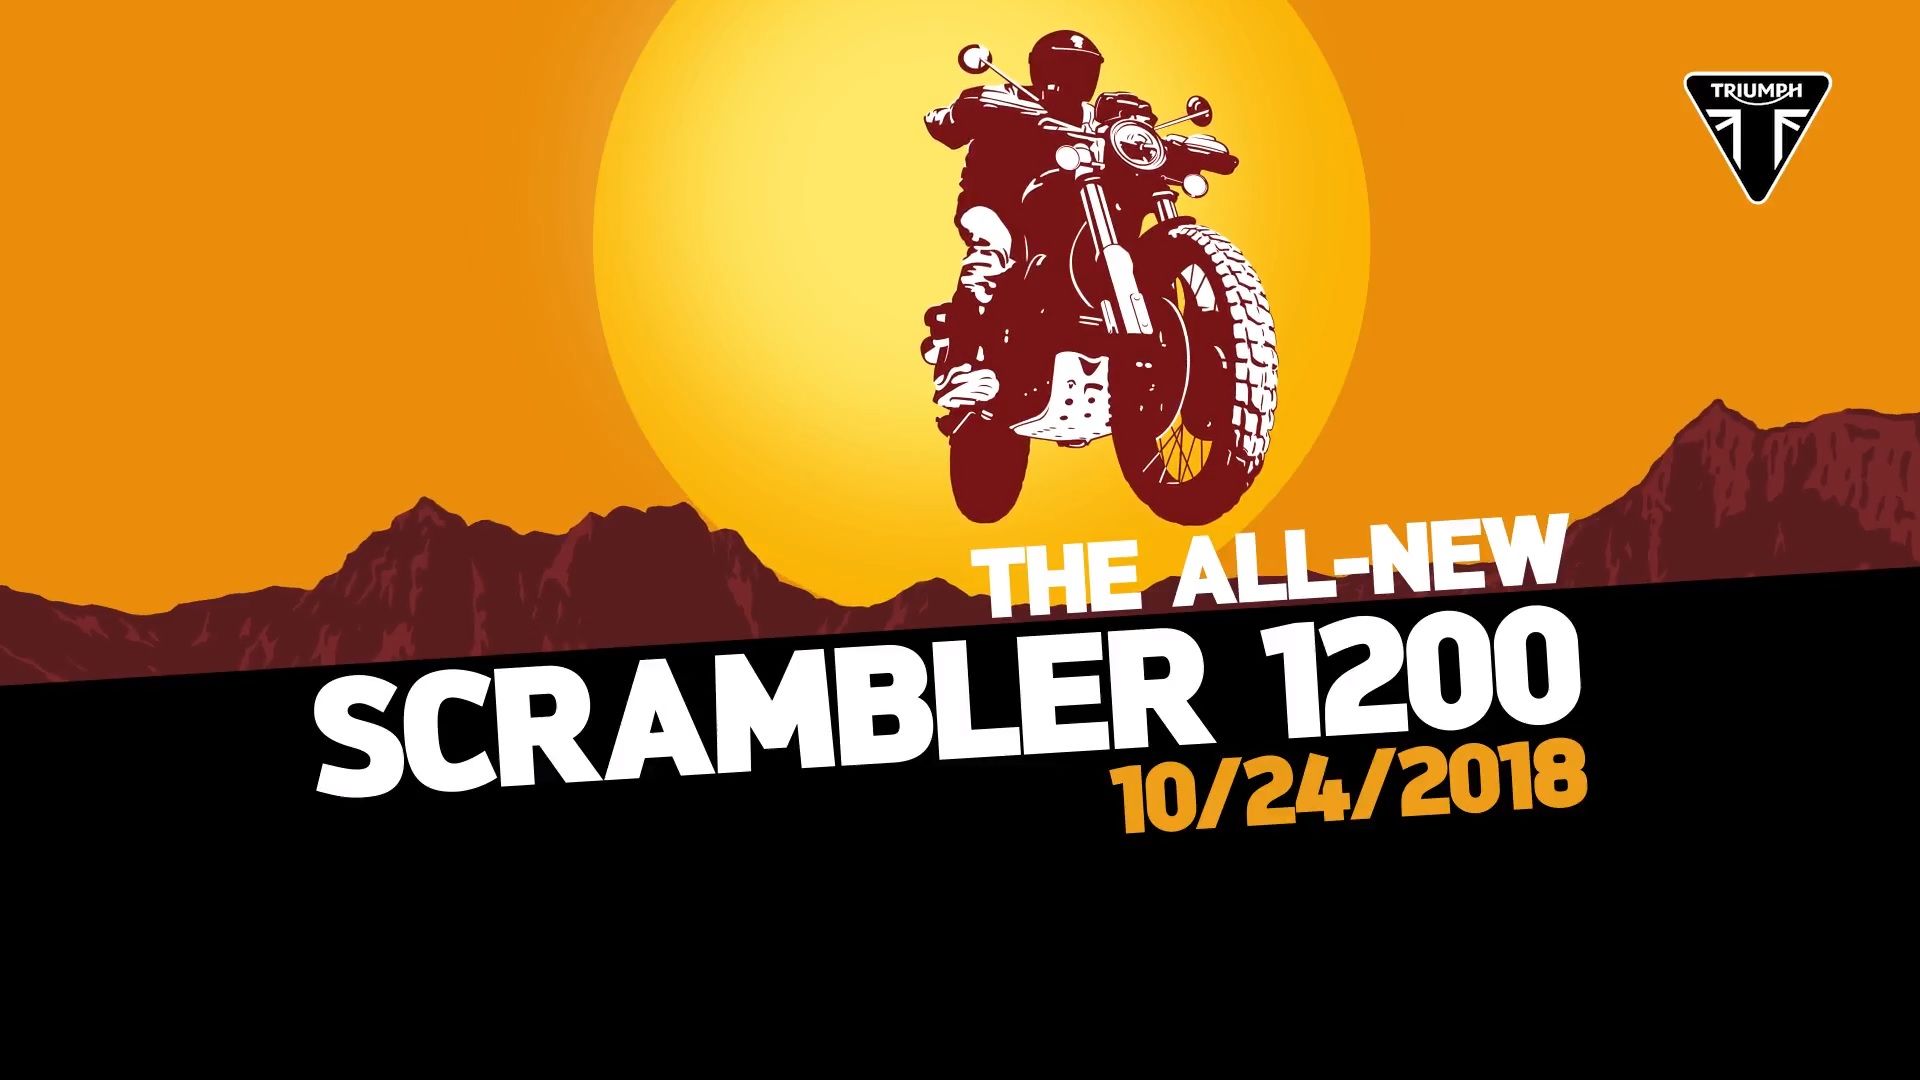 2019 Triumph's 1200cc Scrambler confirmed with this video